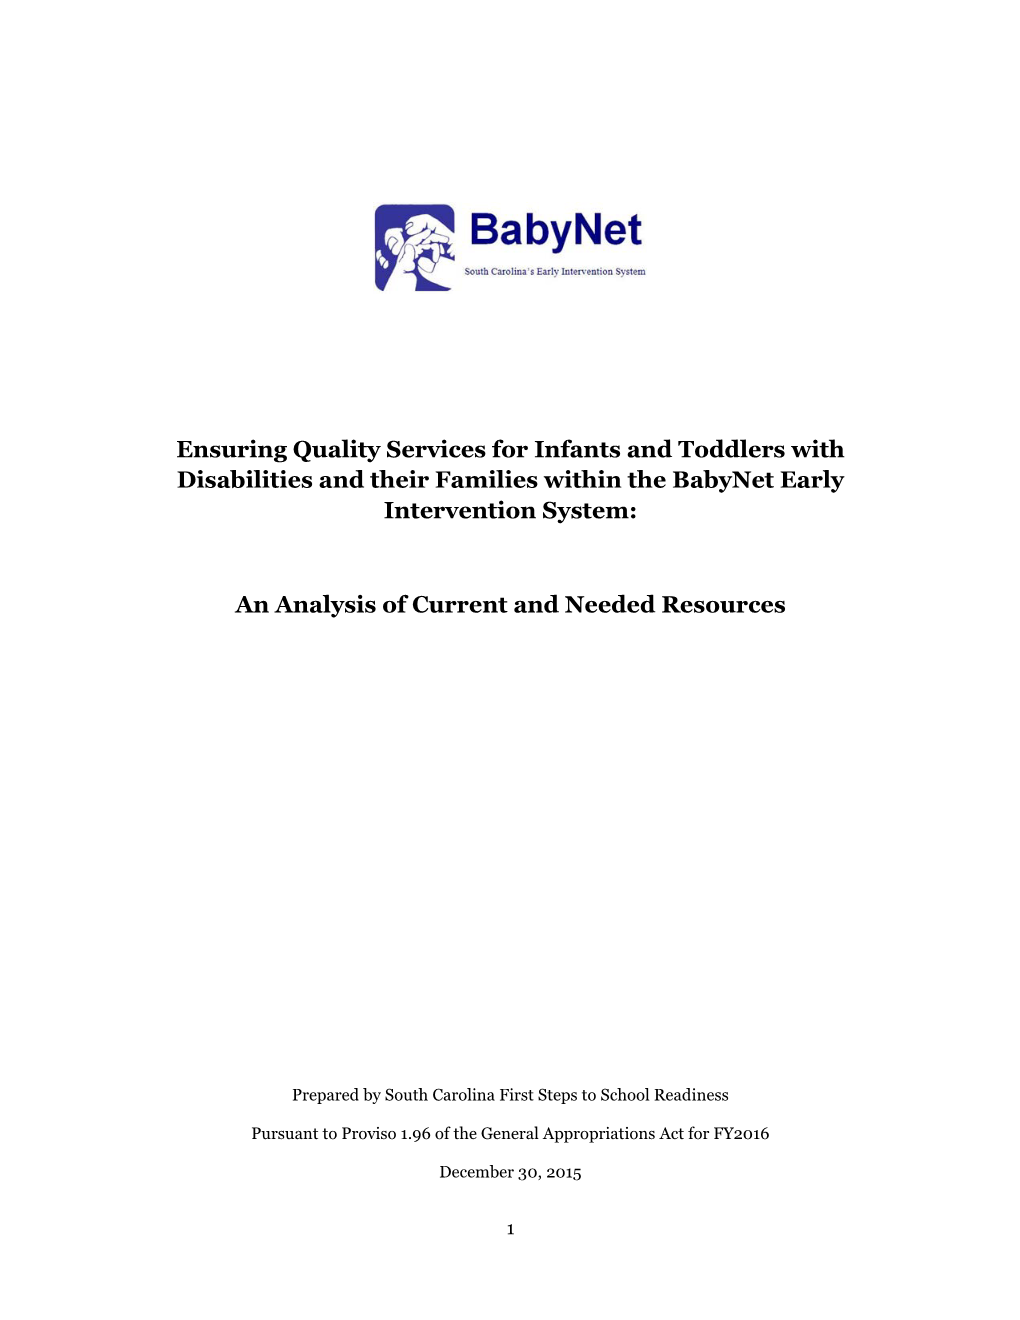 Babynet Report to General Assembly Pursuant to Proviso 1.96